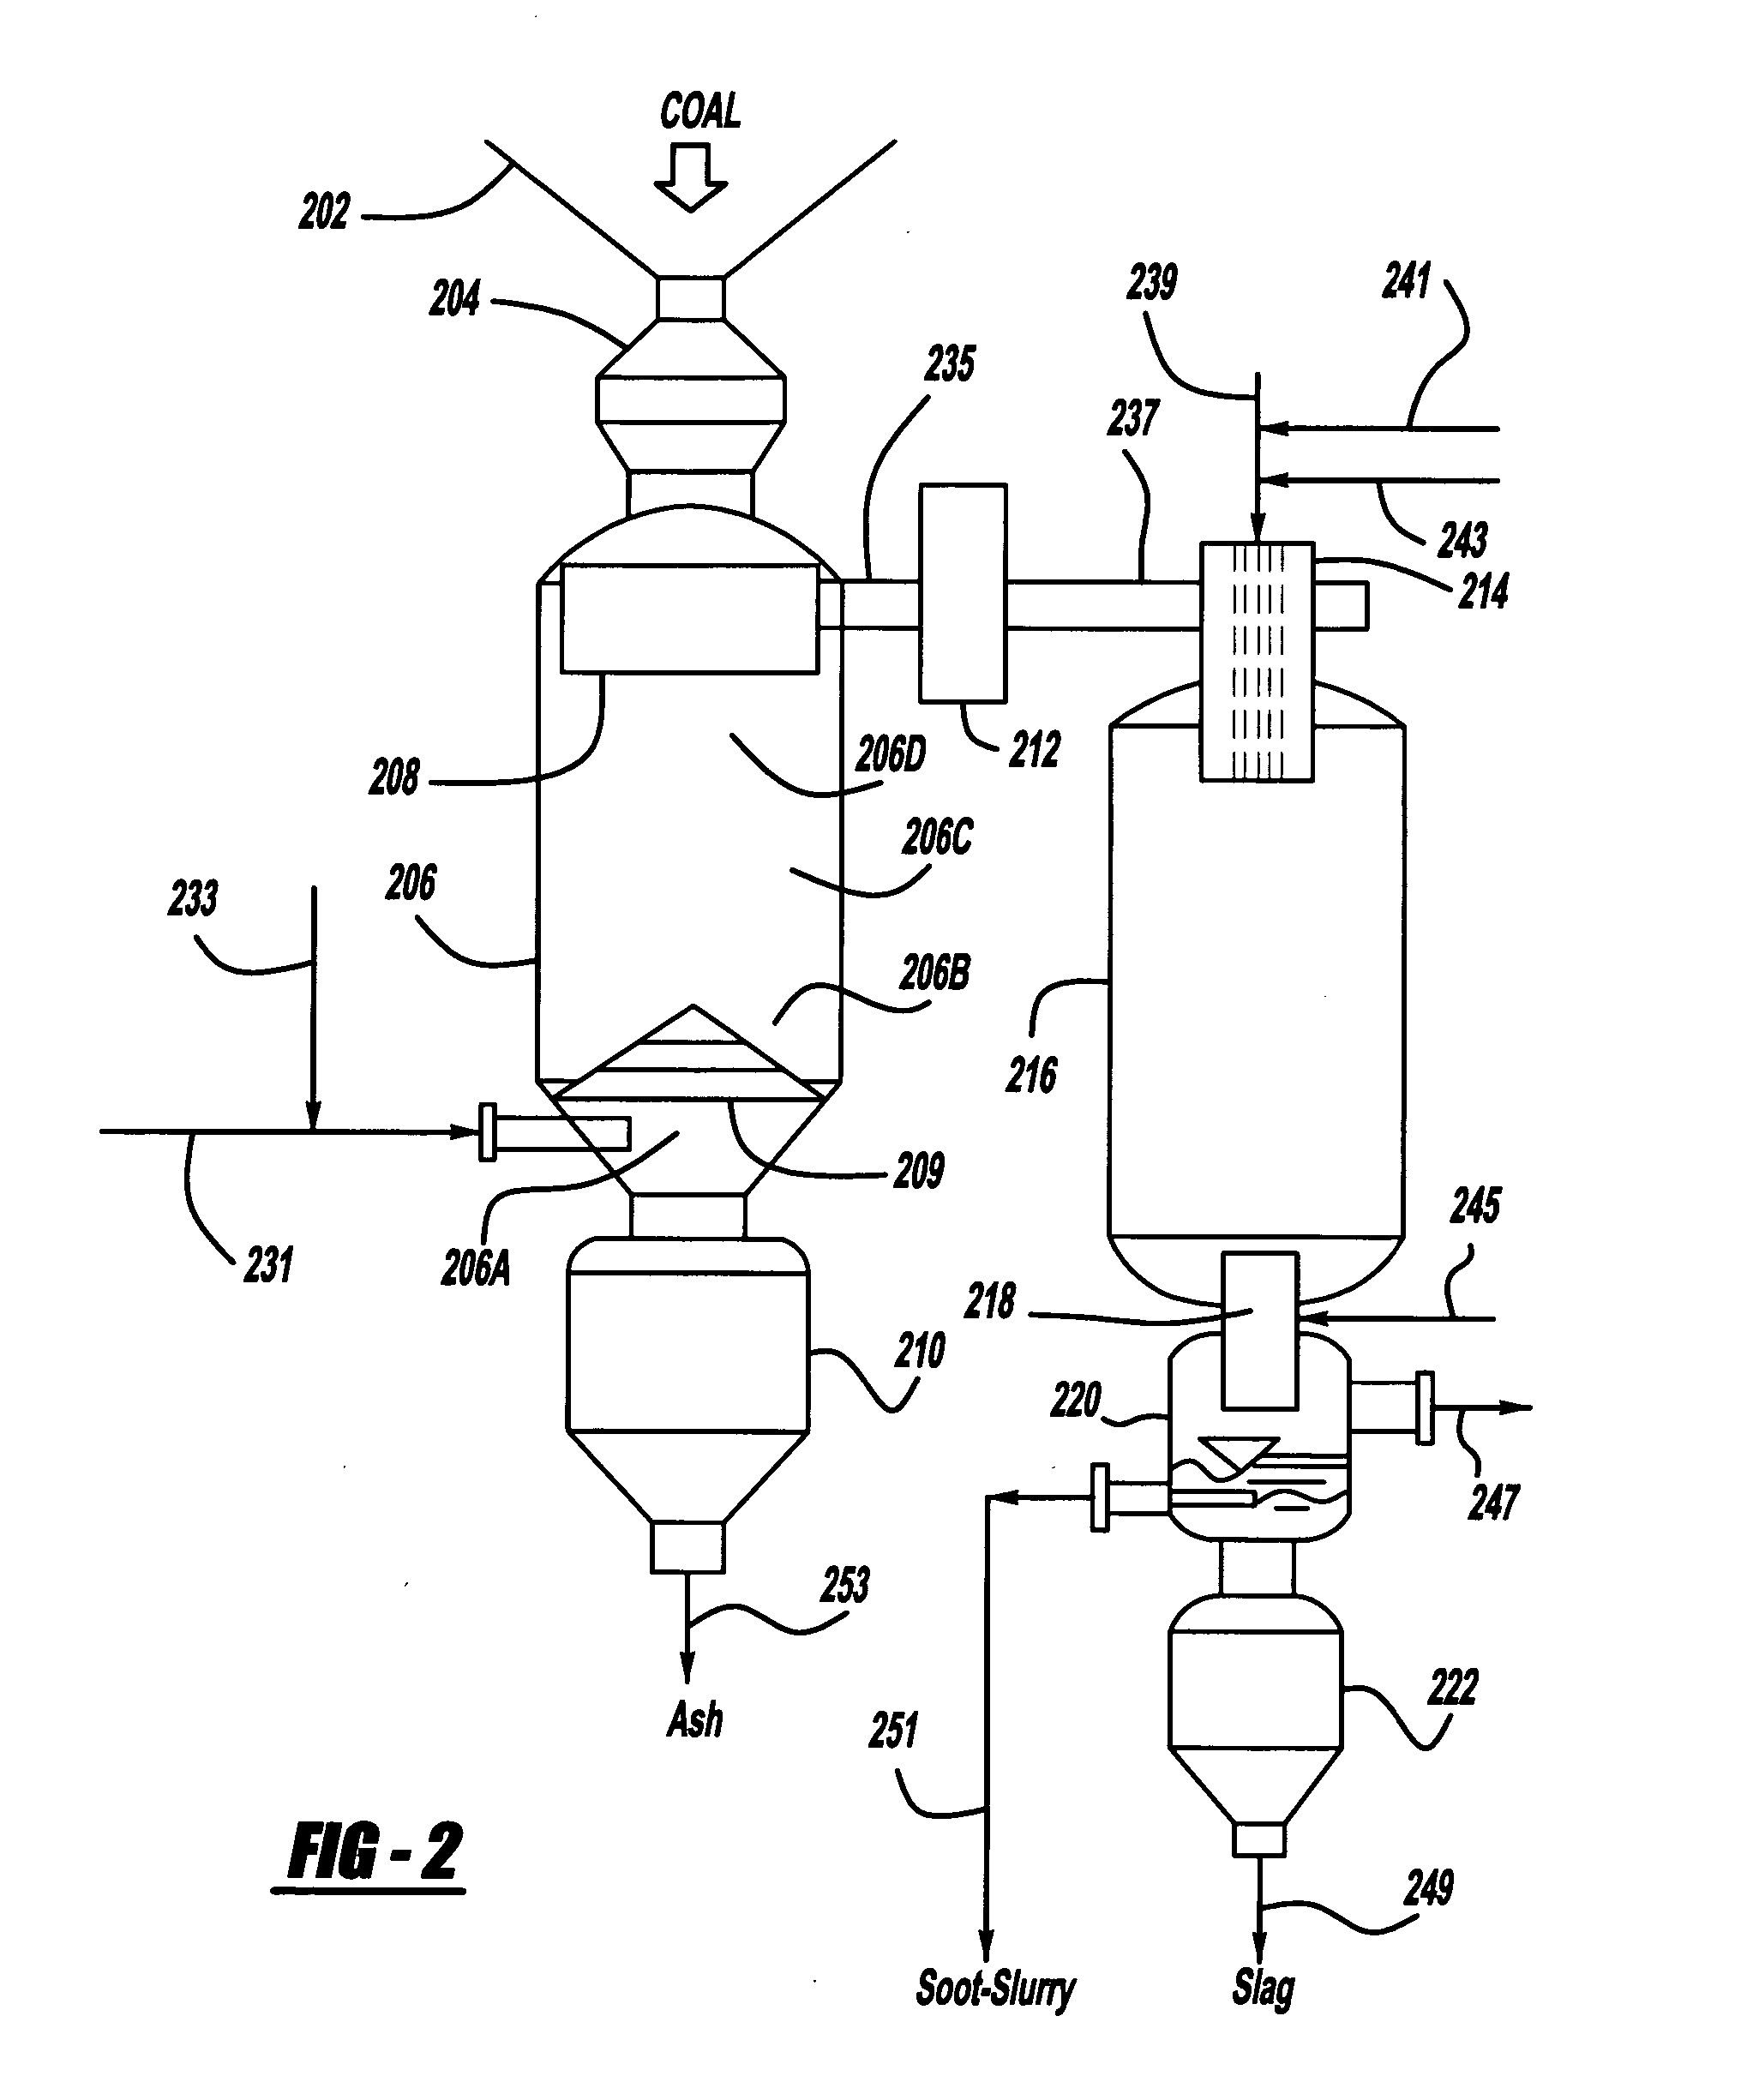 Apparatus and method for coal gasification